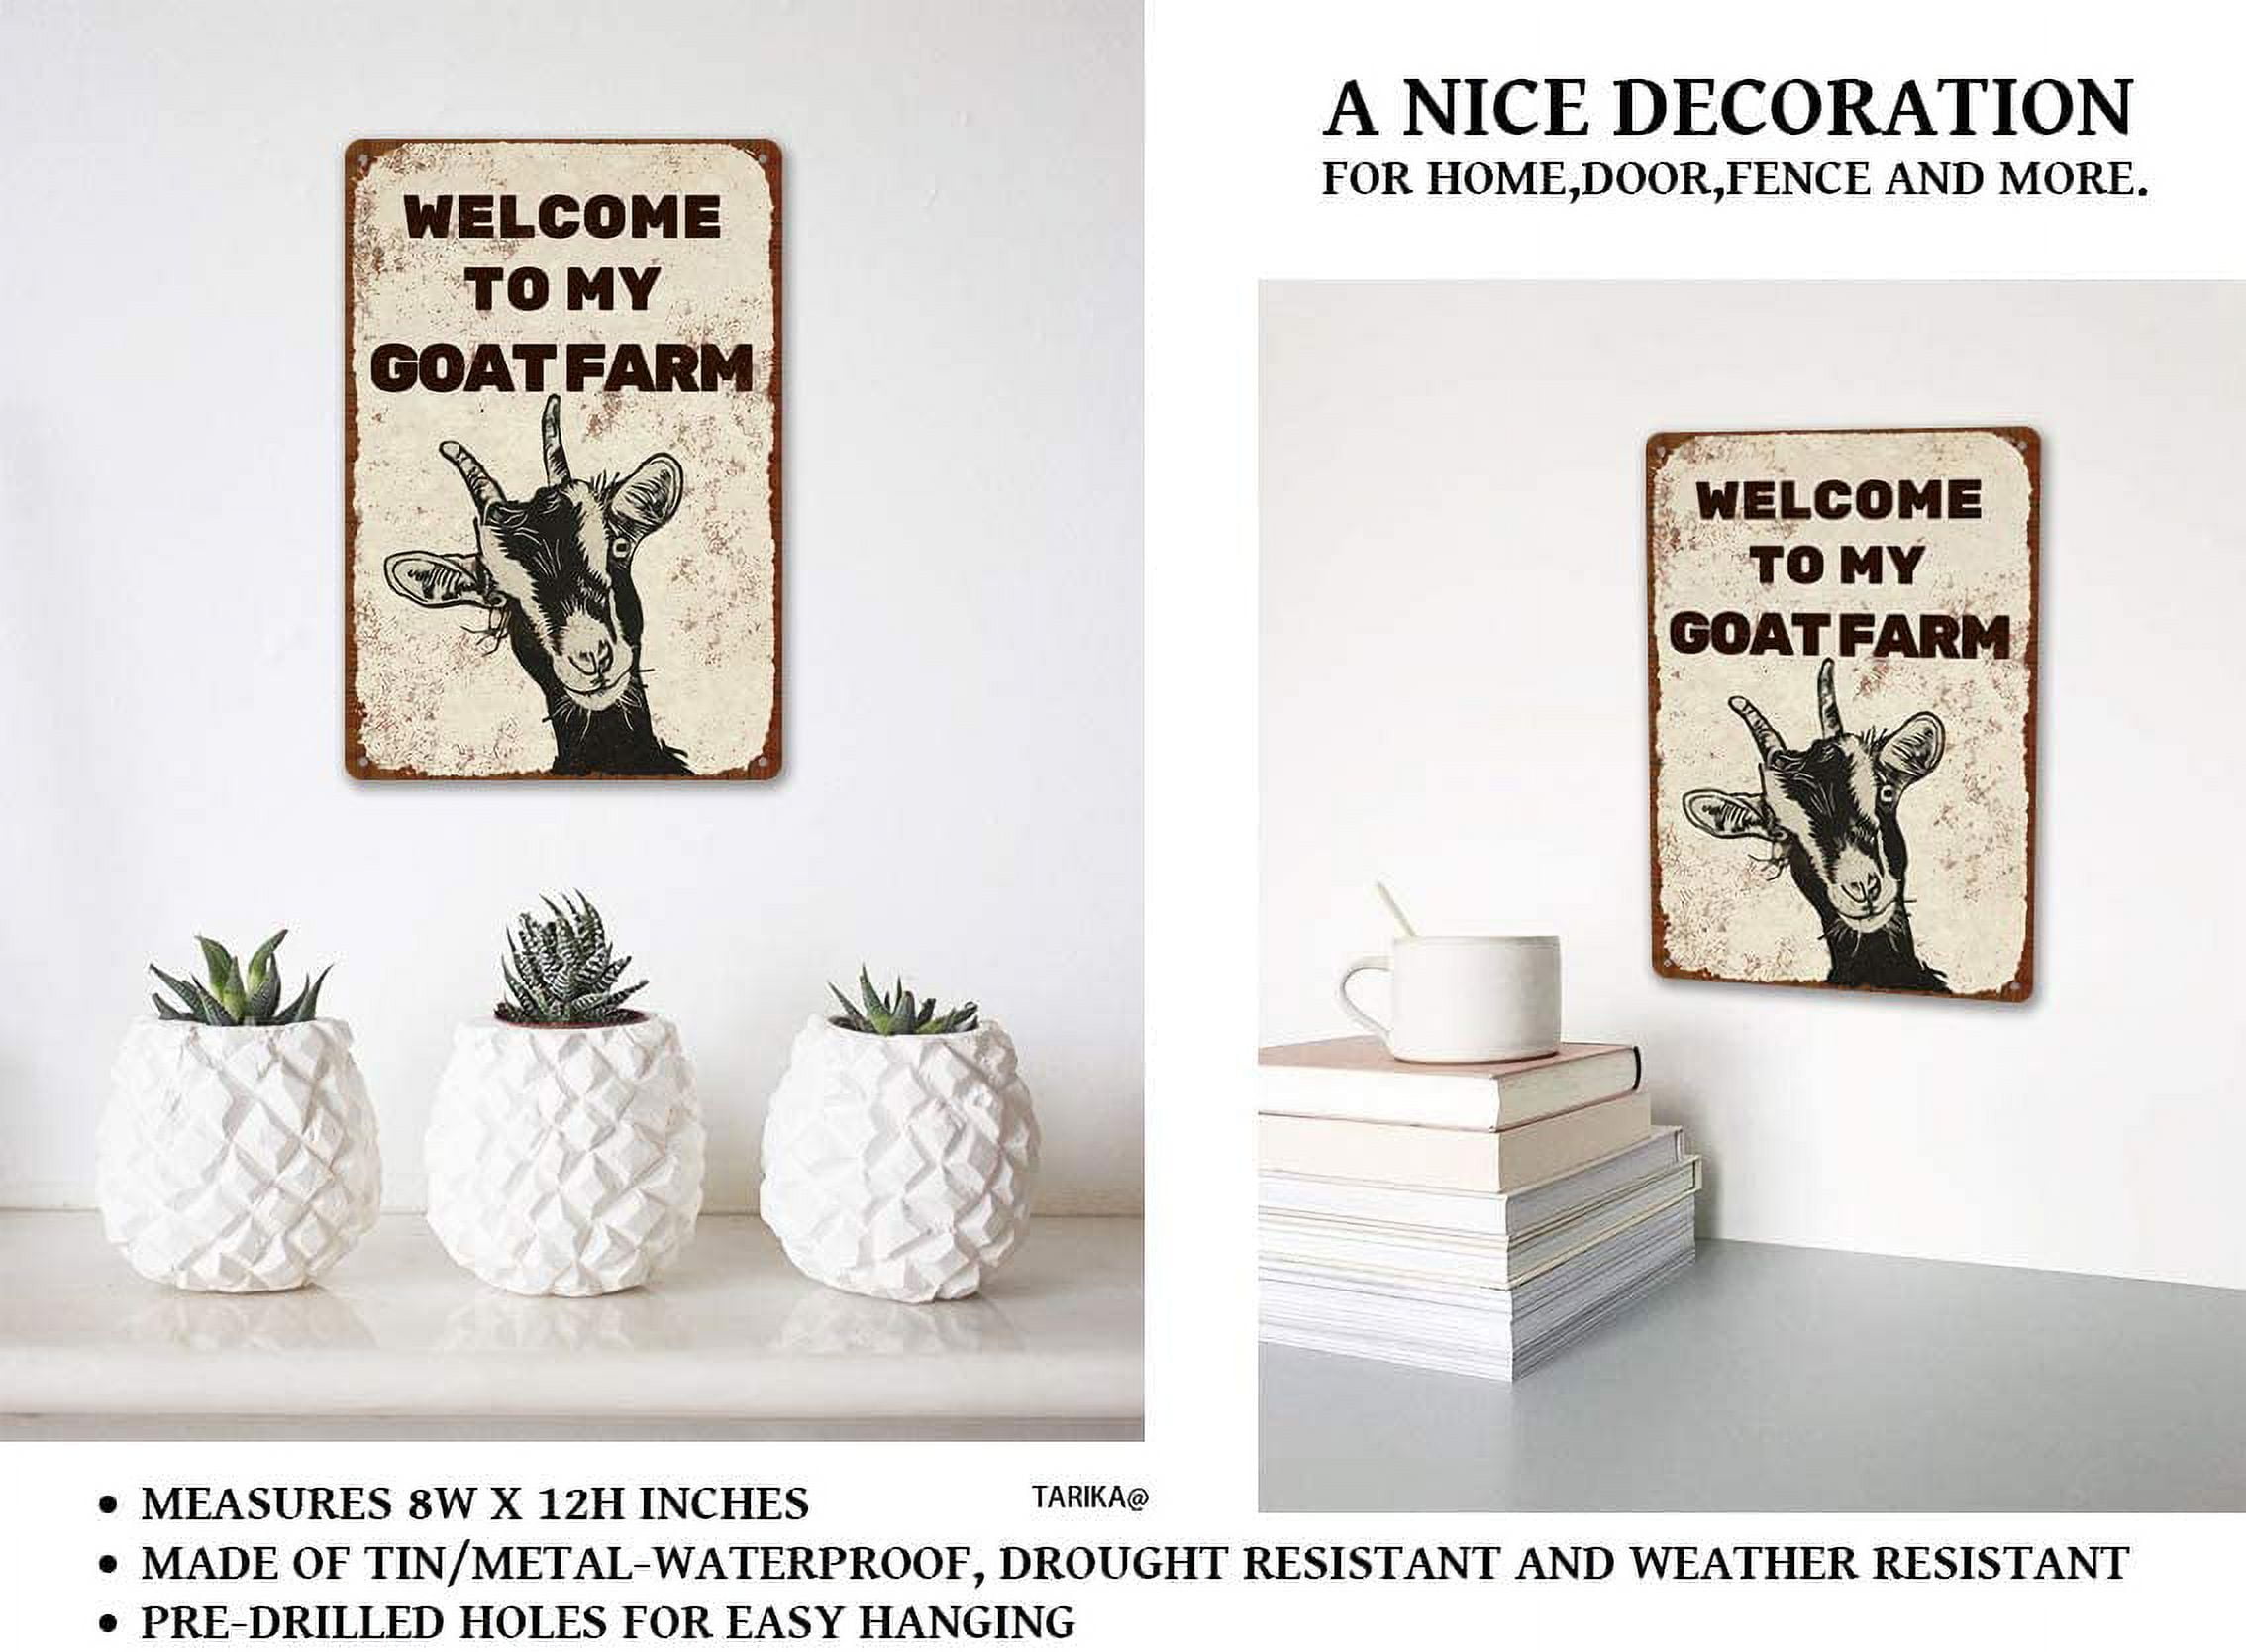 Farmers Market Organic Goat Cheese Wholesome Goat Milk Vintage Look Metal 20x30 cm Decoration Poster Sign for Home Room Bathroom Farm Garden Funny